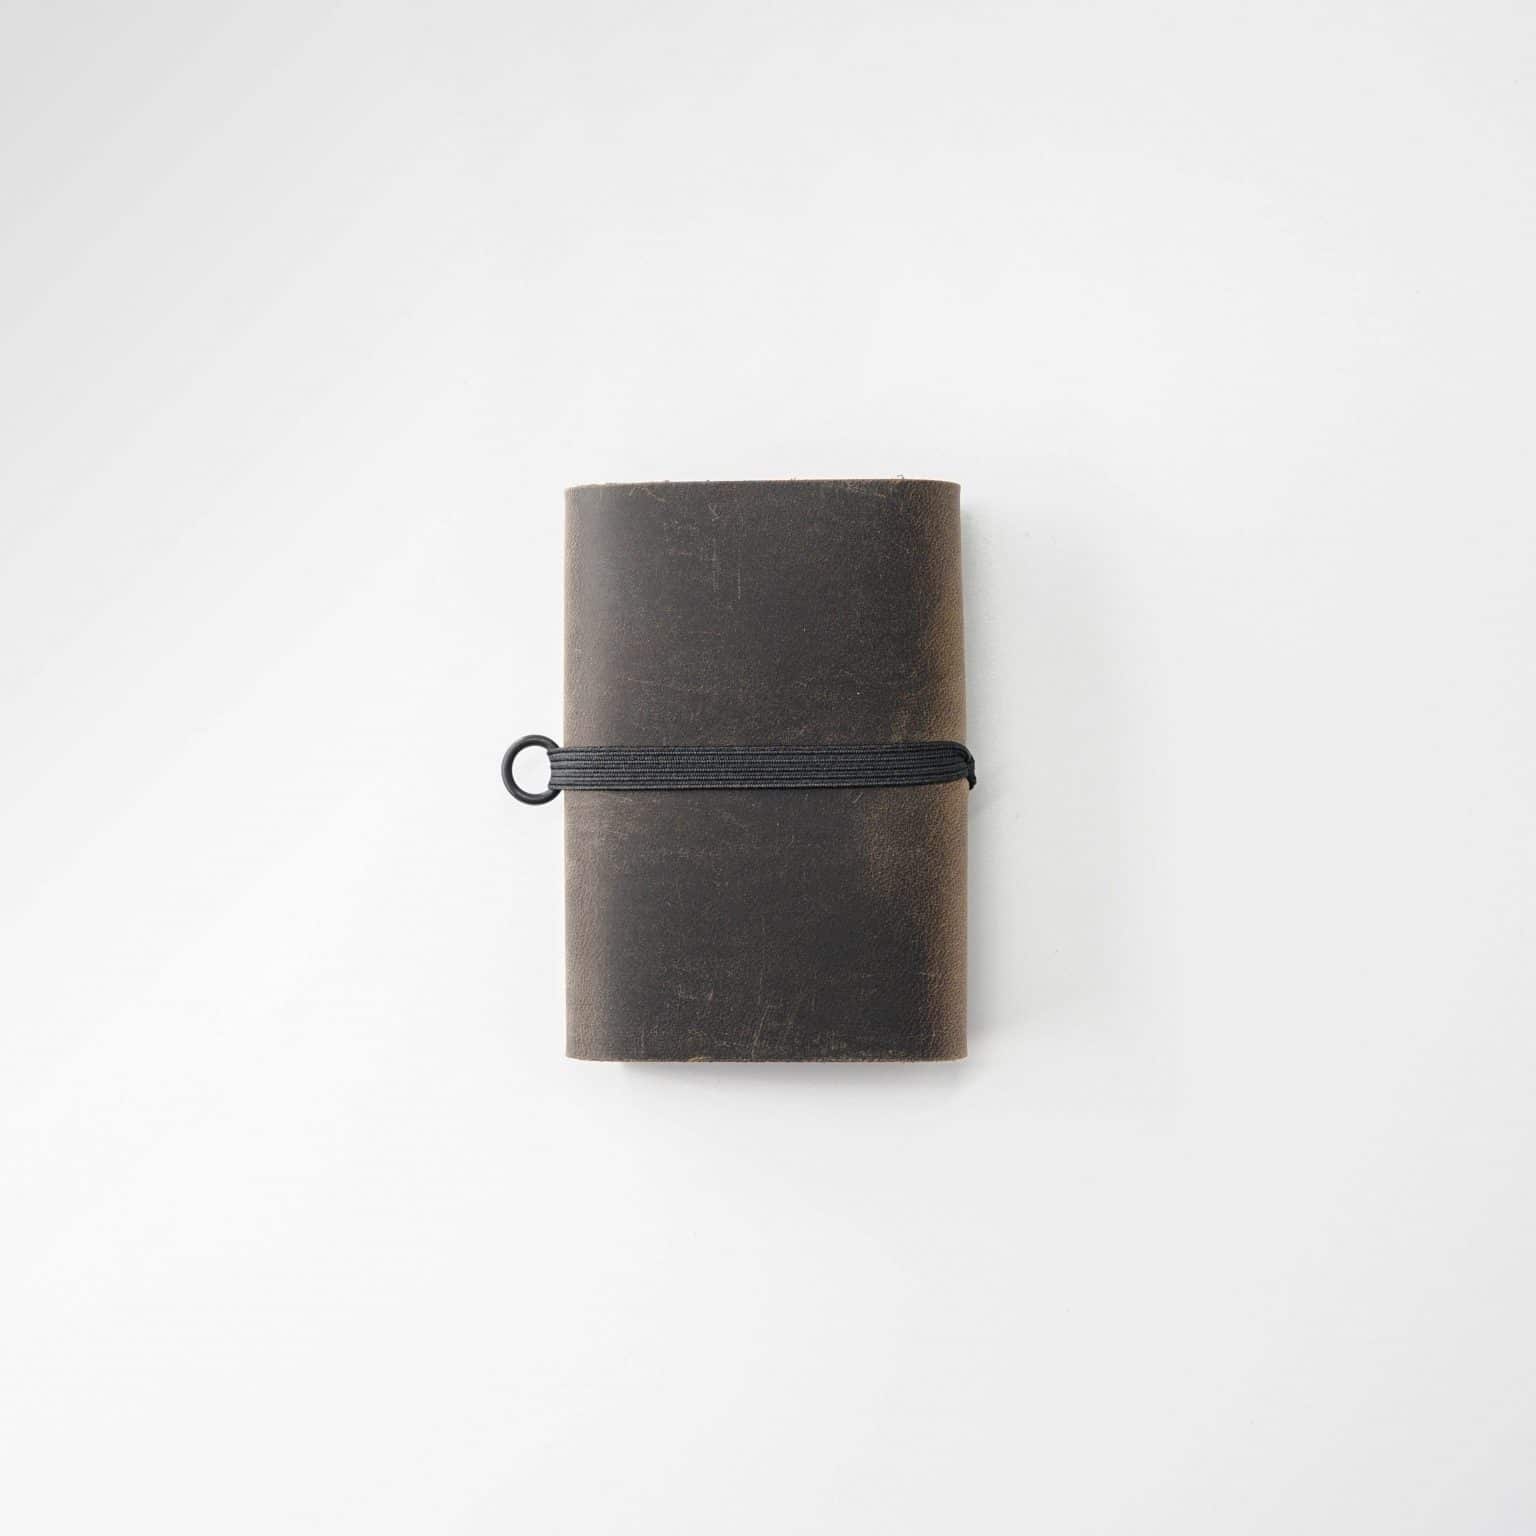 Pocket-sized leather wallet for streamlined carrying.